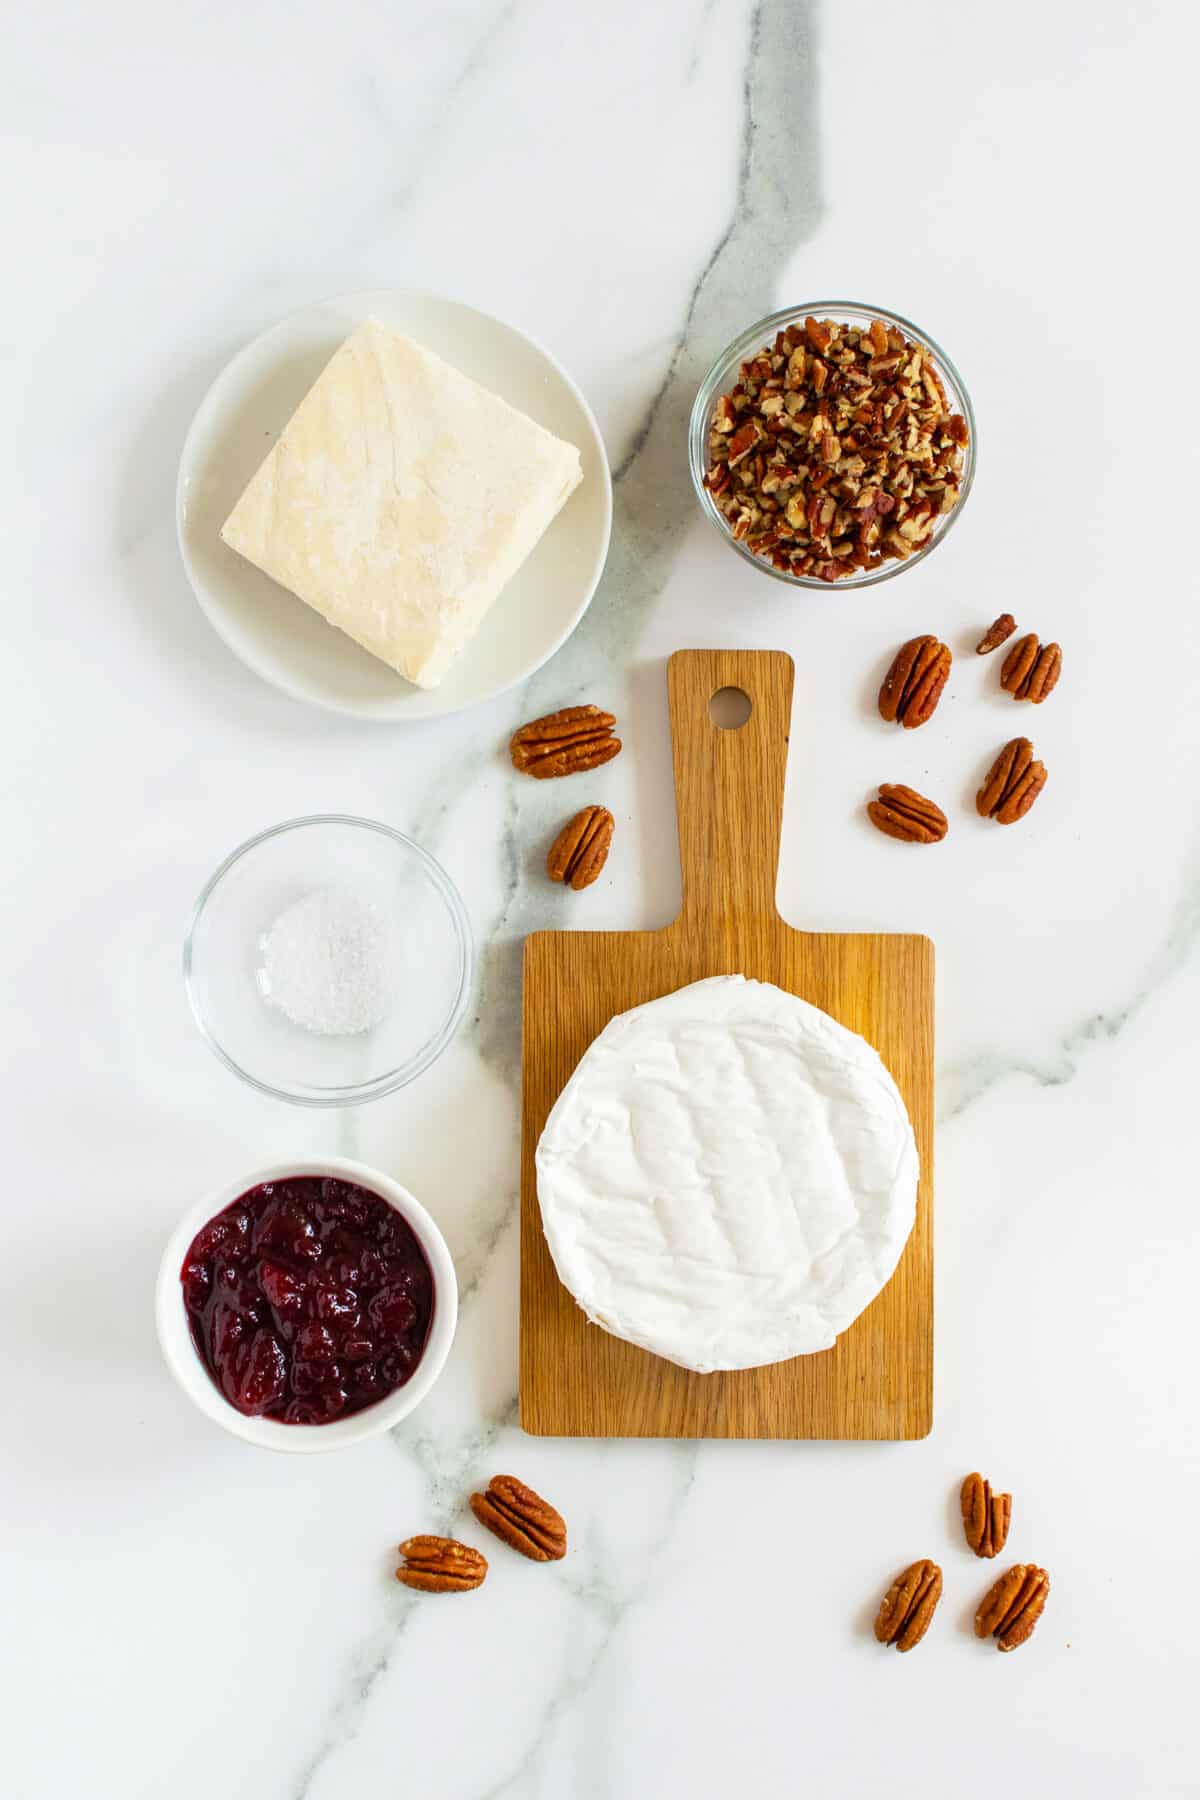 cranberry brie bites ingredients in small bowls